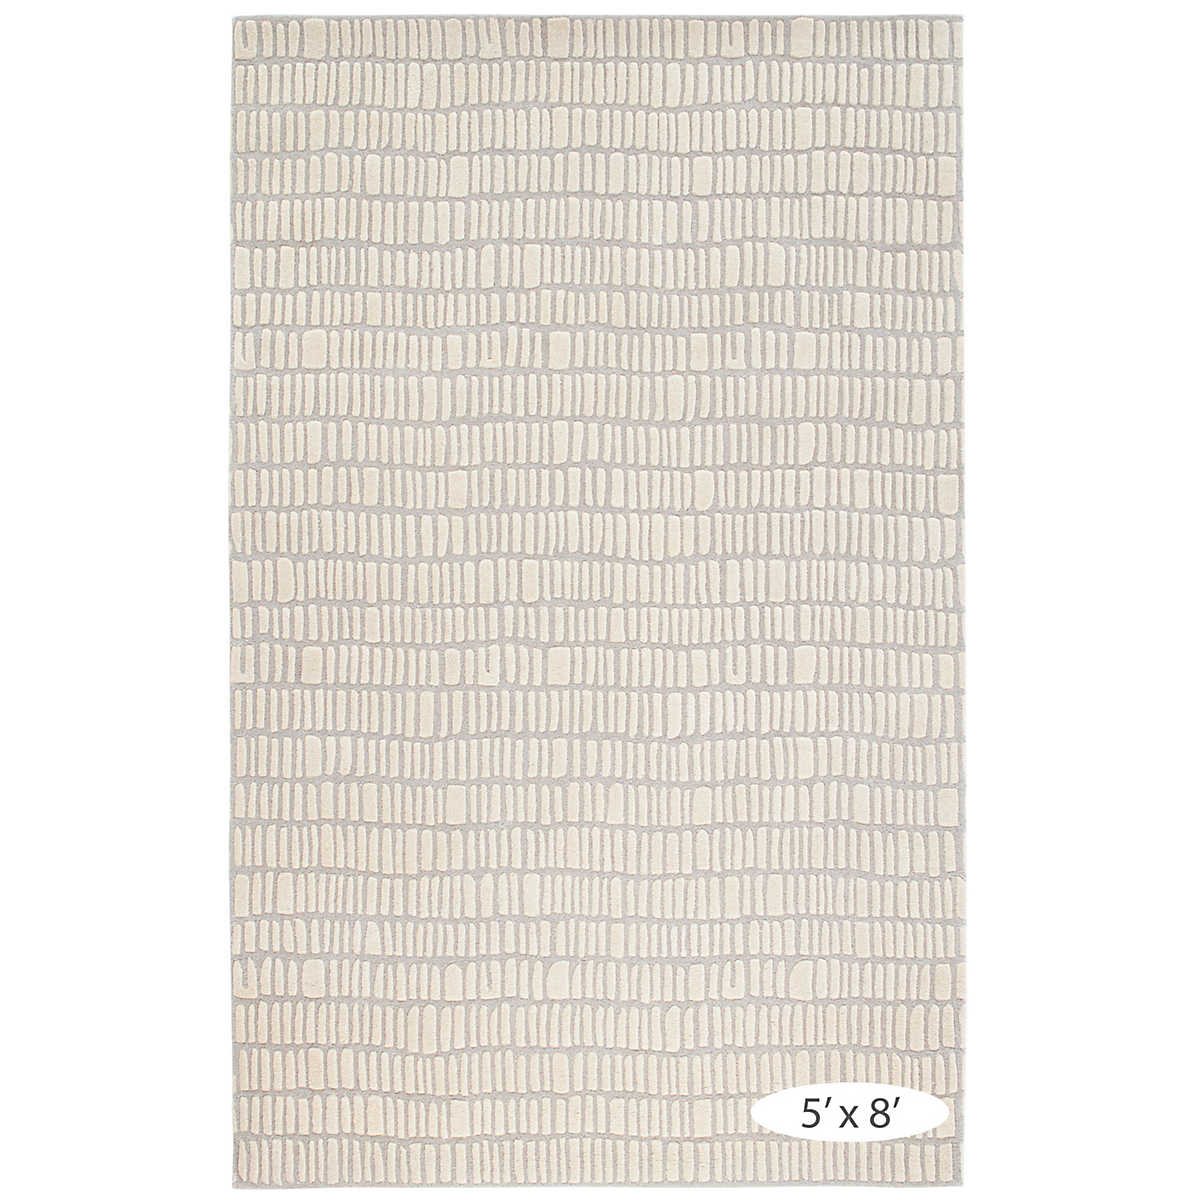 The Roark Ivory Rug design of this luxurious, plush wool rug conjures surfaces of ancient hand-laid rock walls. The contrast between stone and mortar is further represented by the meticulously tufted high and low levels of the velvety hand-sheared pile. Amethyst Home provides interior design services, furniture, rugs, and lighting in the Miami metro area.